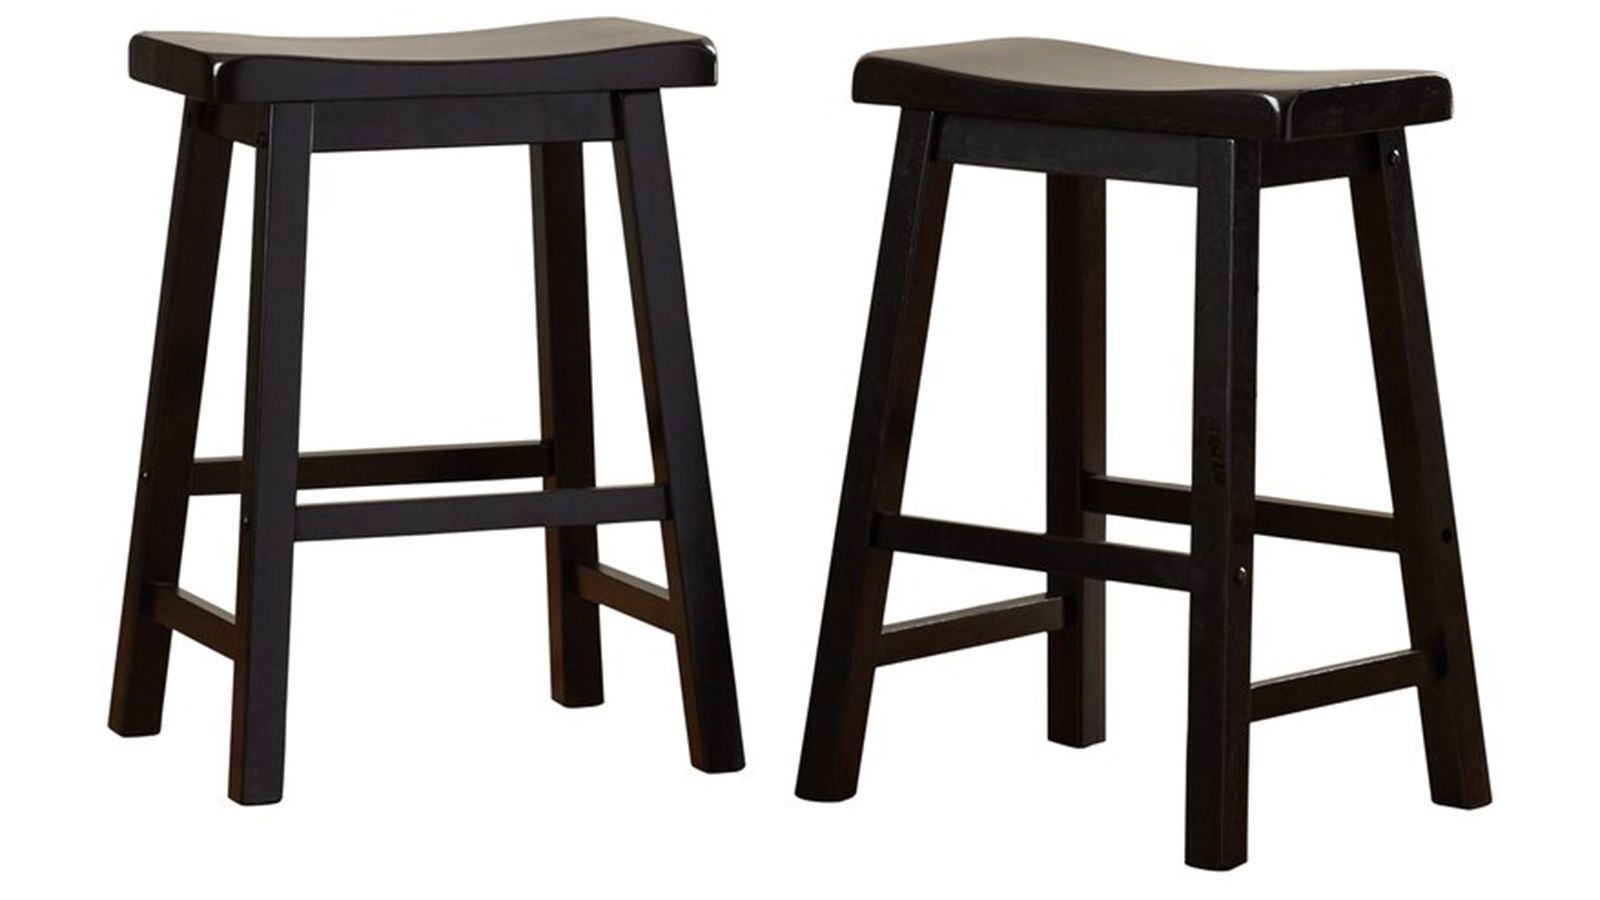 Wayfair Chairs 24 Top Rated And, Wayfair Counter Height Bar Stools With Backs